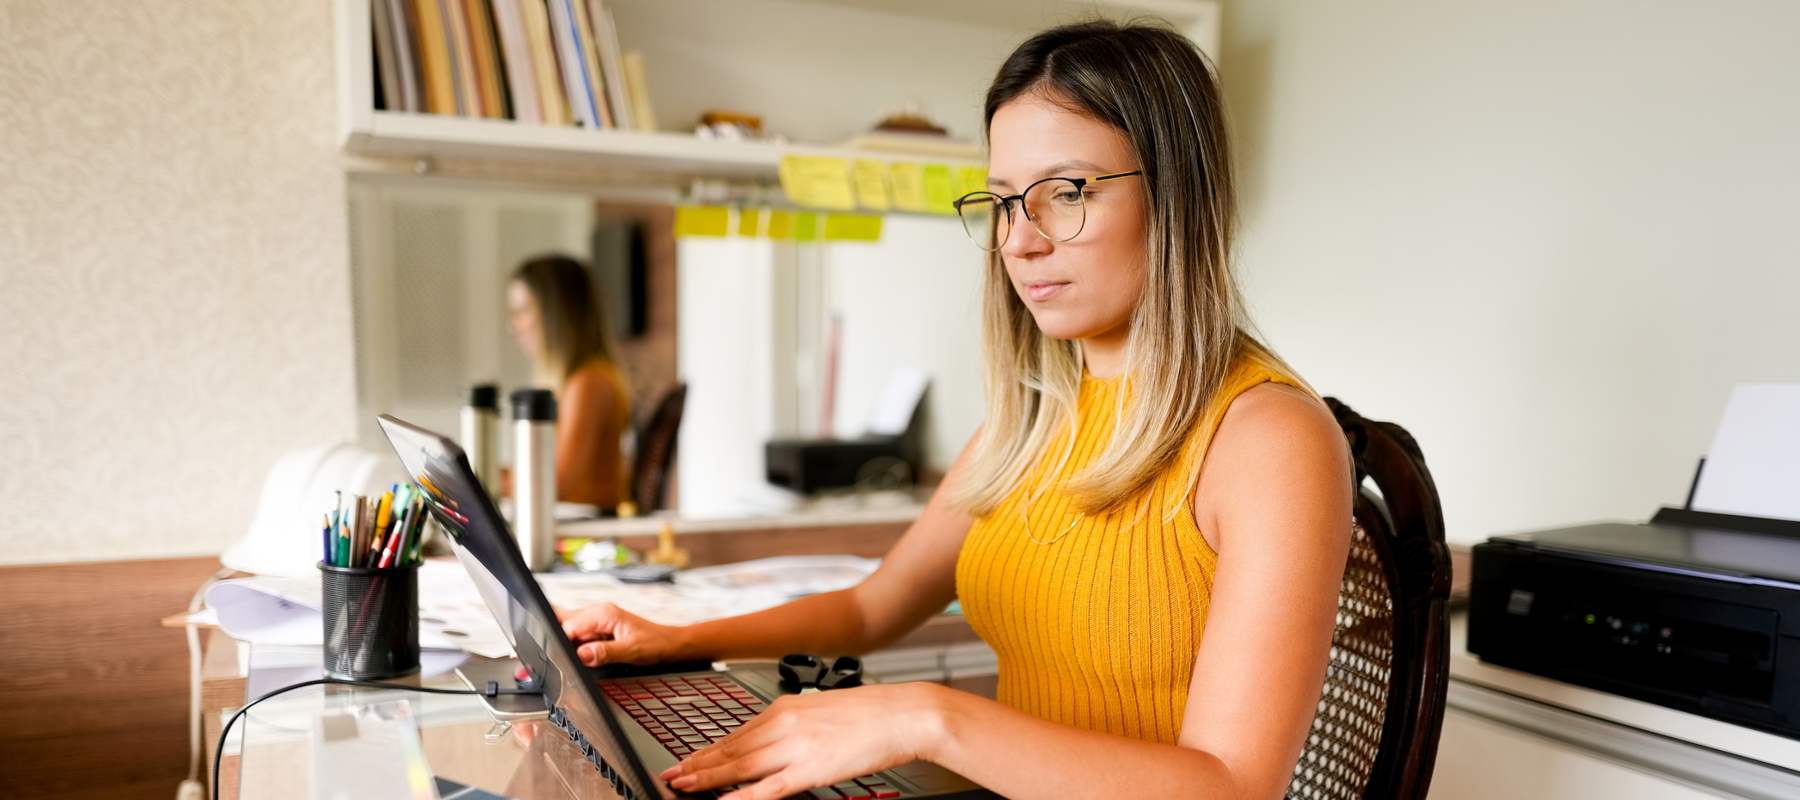 Woman executive assistant sitting at laptop in home, typing while working.